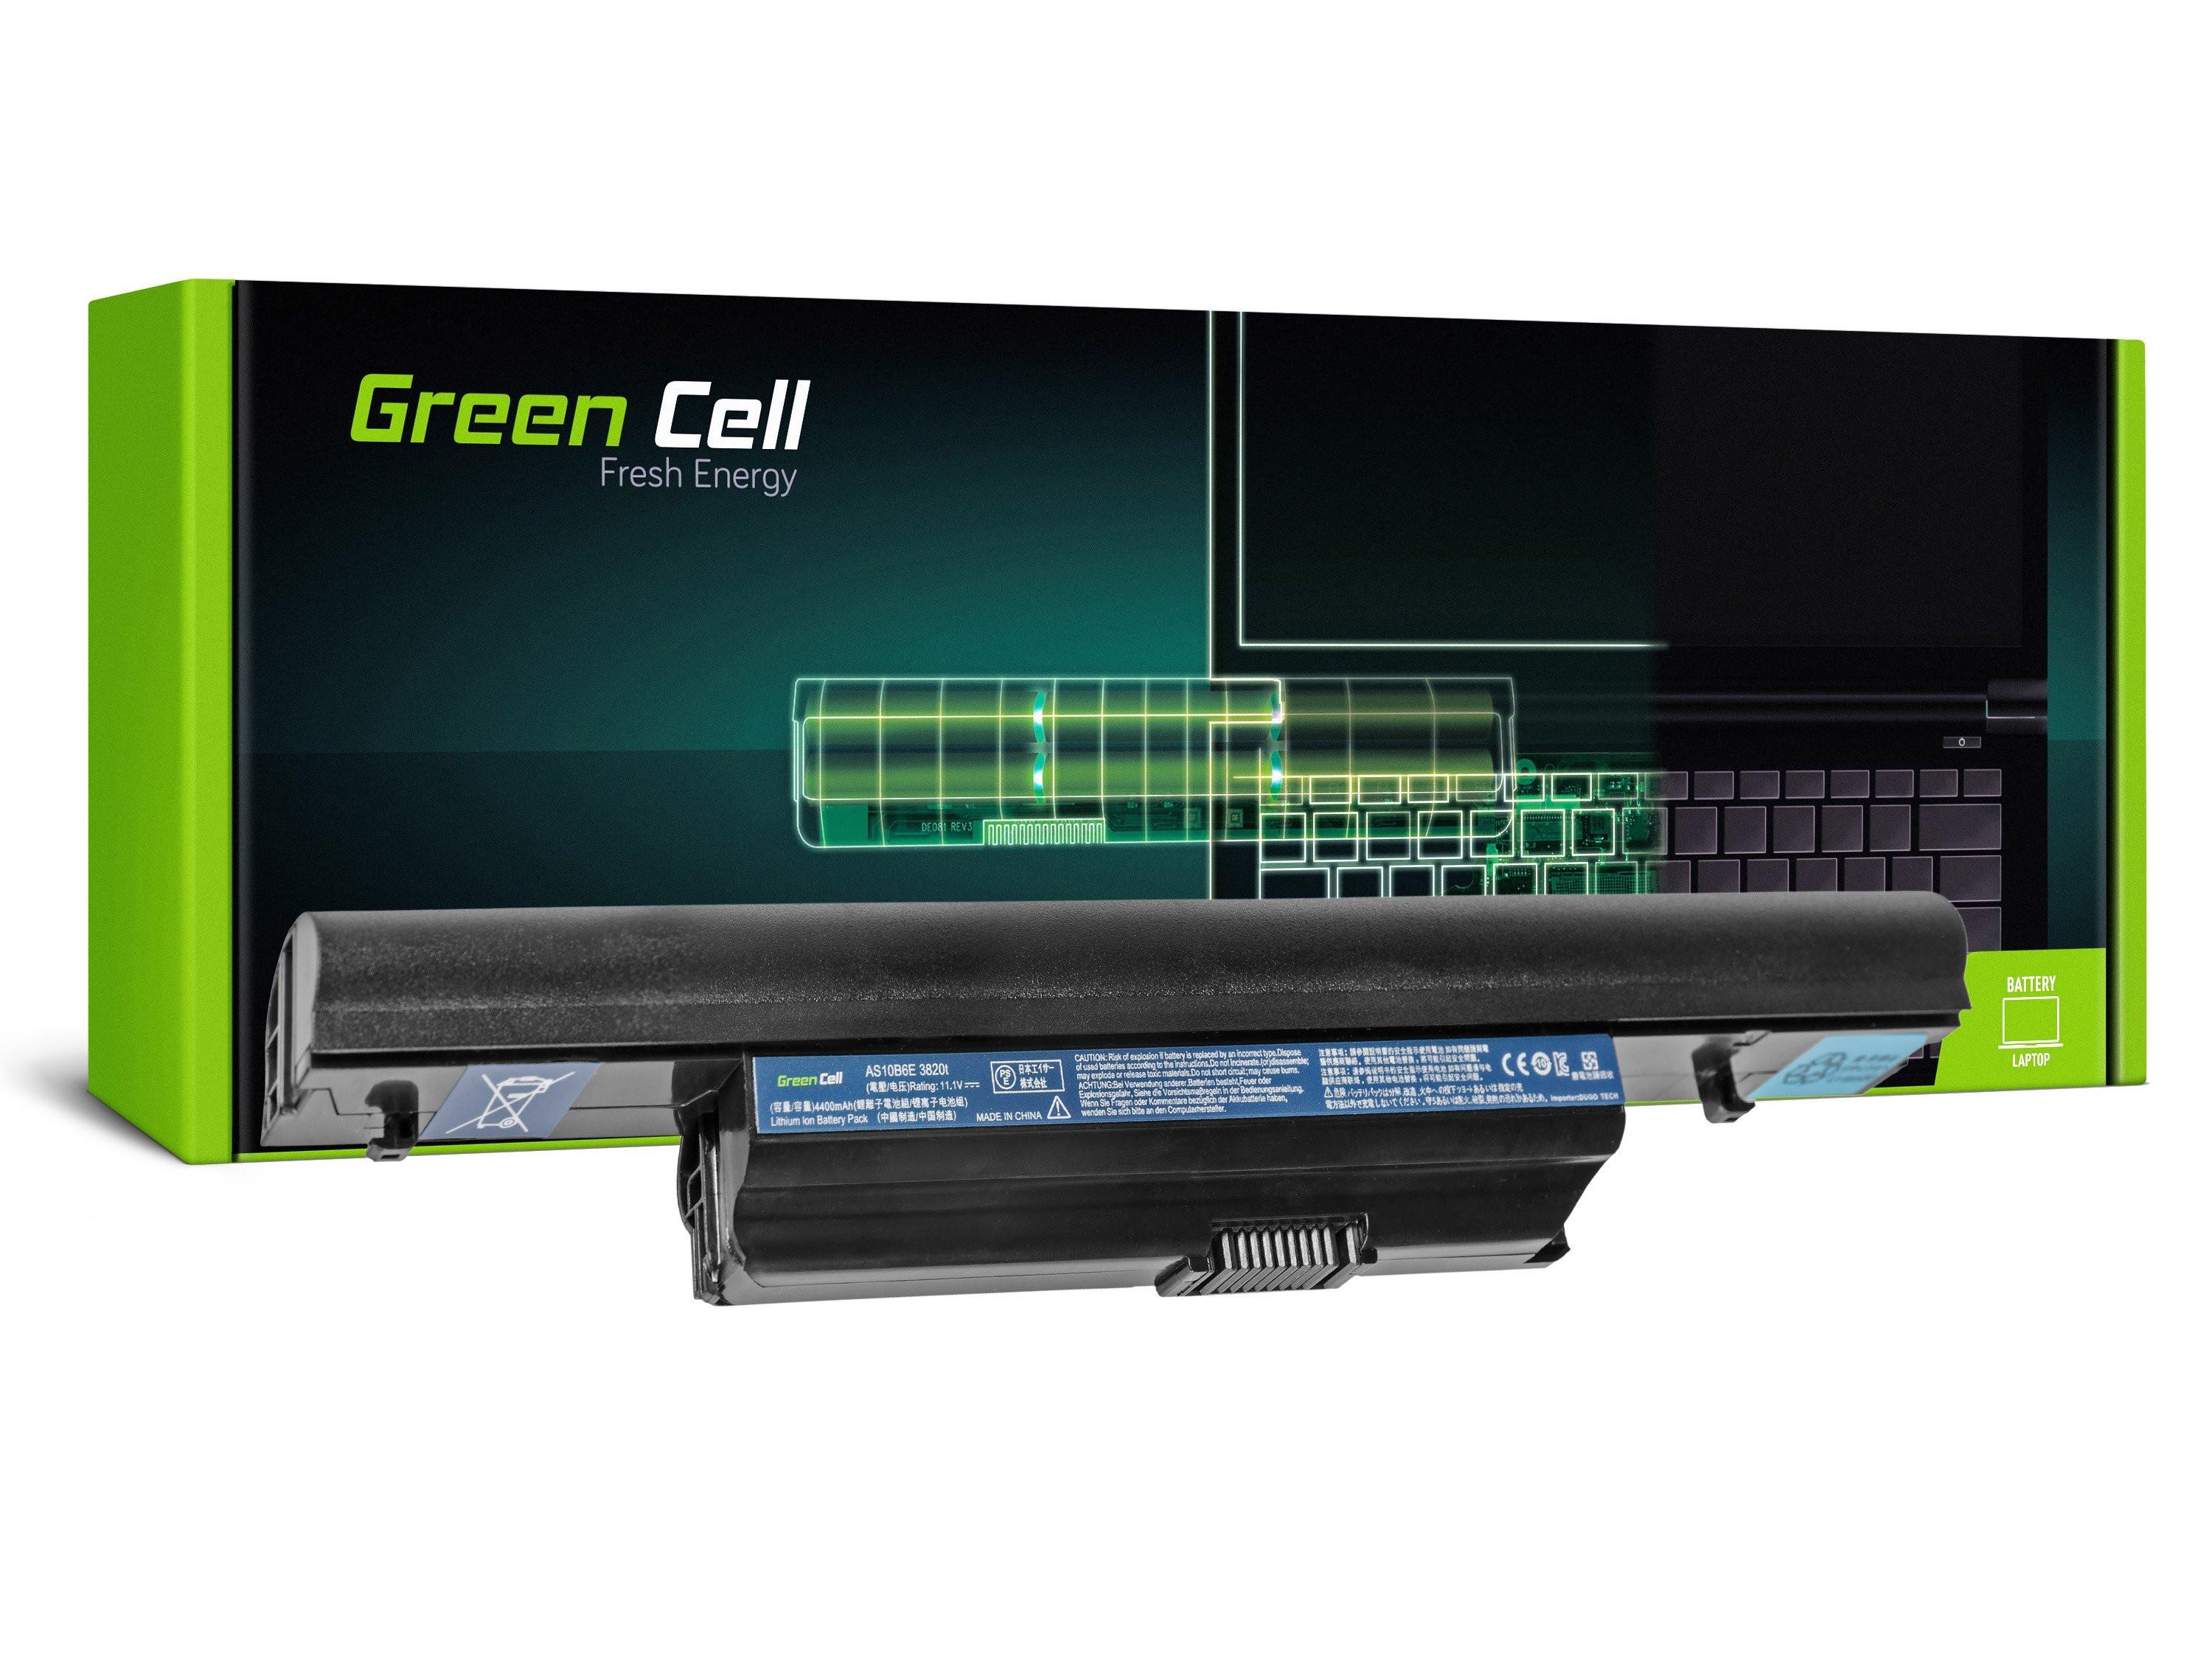 Green Cell Baterie AS10B31 AS10B75 AS10B7E pro Acer Aspire 5553 5745 5745G 5820 5820T 5820TG 5820TZG 7739 AC13